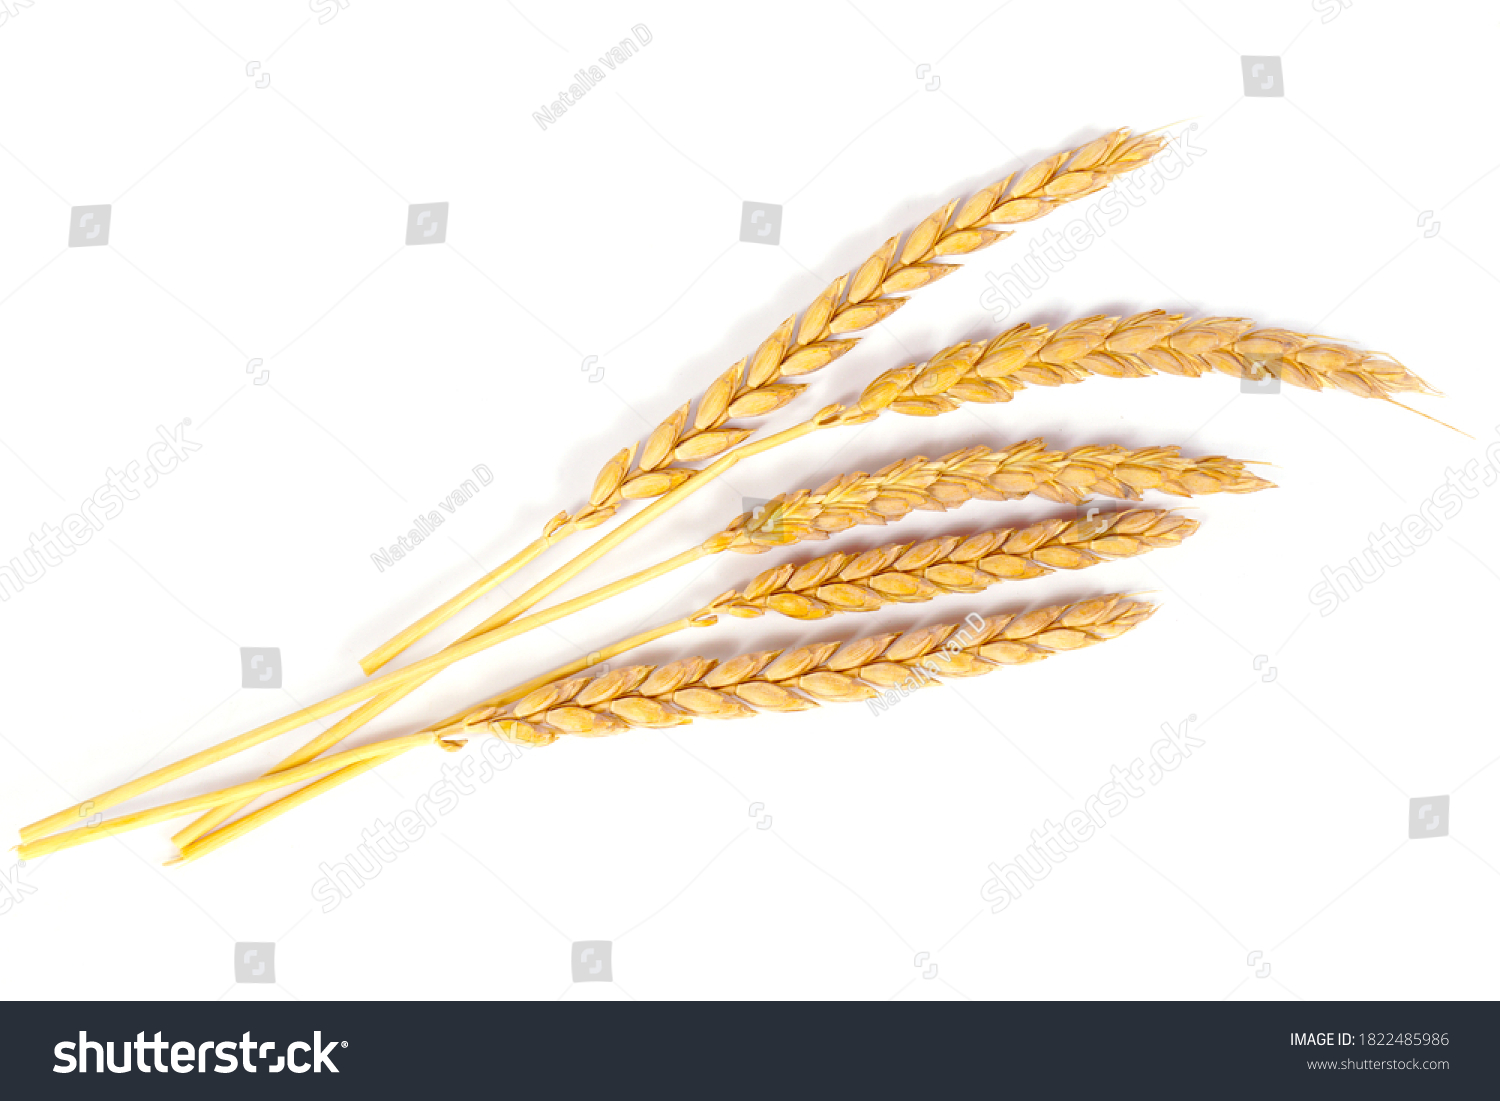 a bright closeup of a bunch of golden ripe dinkel hulled wheat Spelt Spelt (Triticum spelta dicoccum) rye grain relict crop health food ready for harvest isolated on white #1822485986